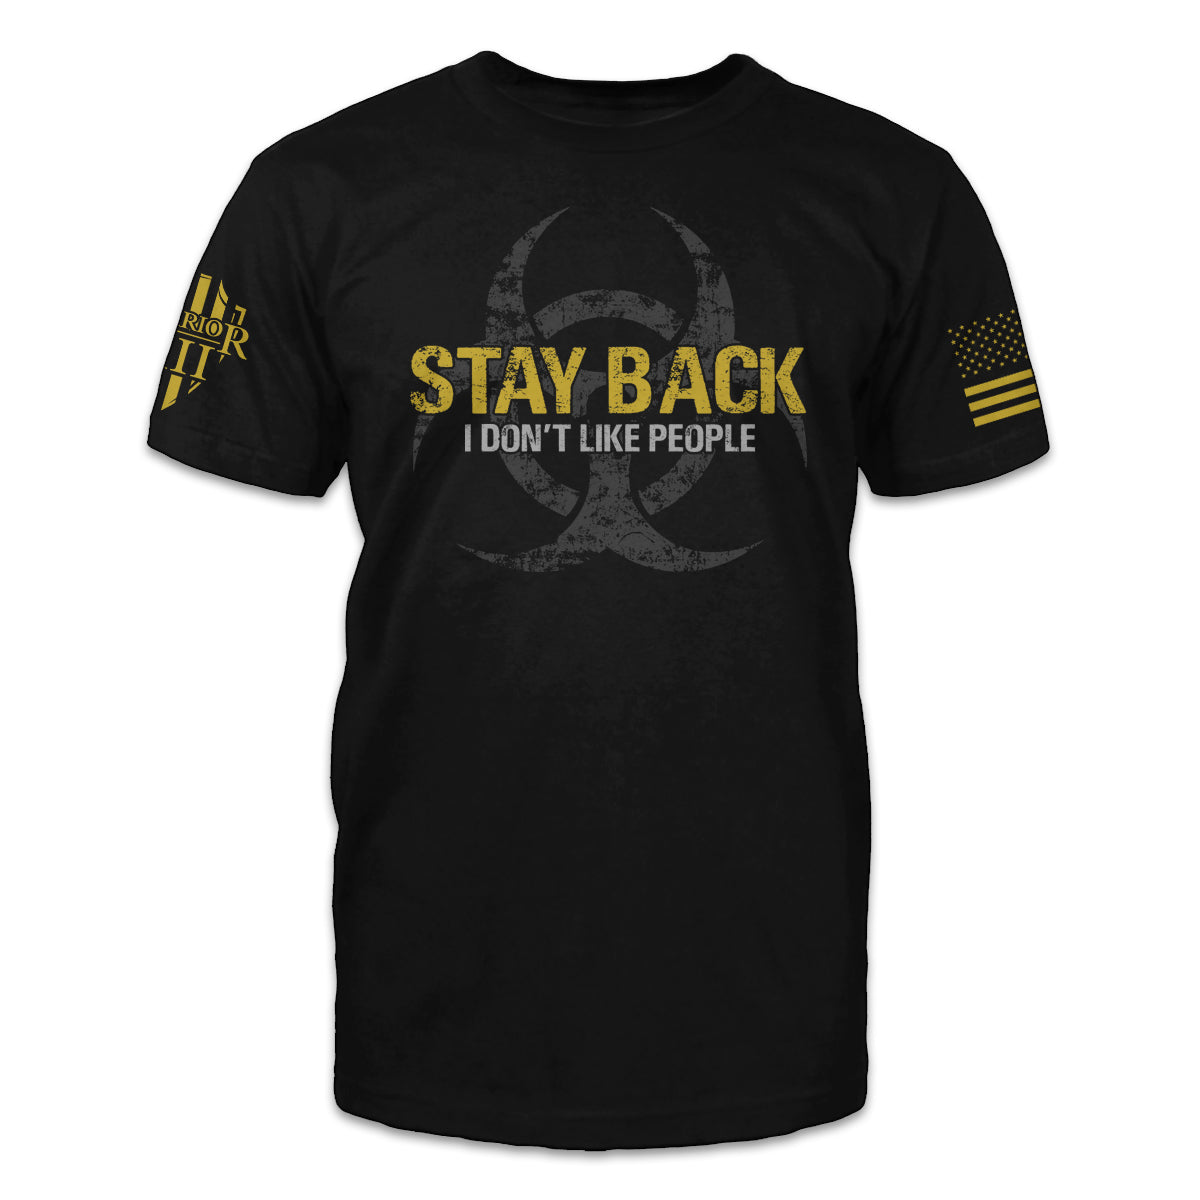 A black t-shirt with the words "Stay Back – I Don’t Like People" printed on the front of the shirt.